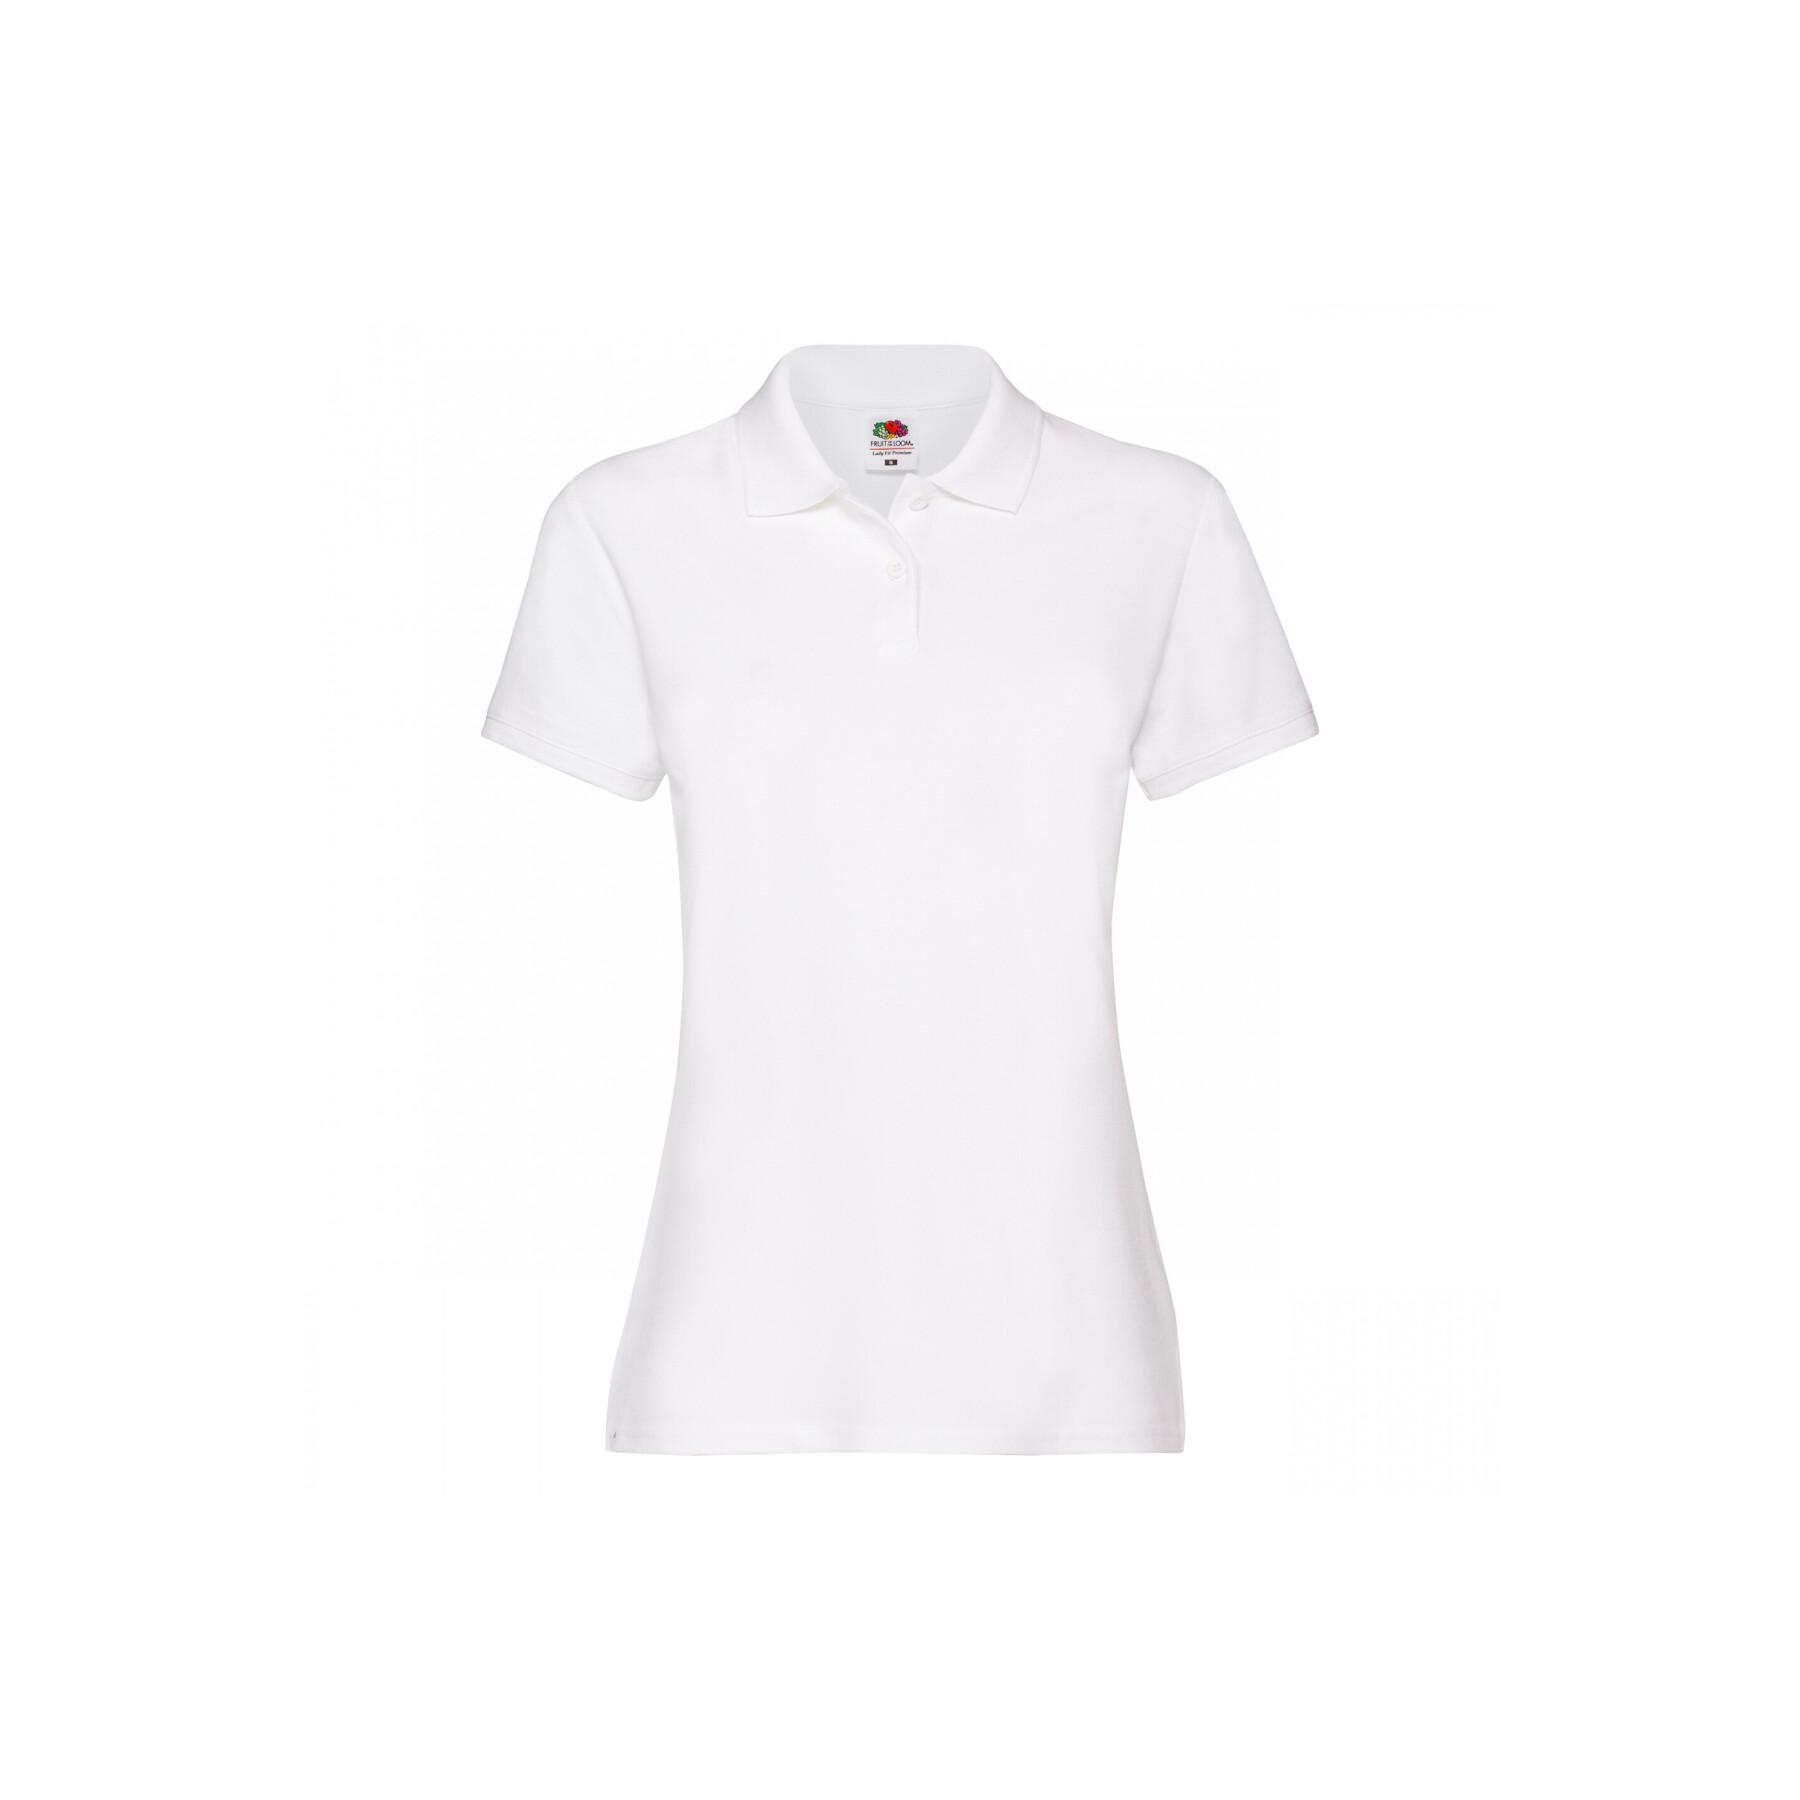 Polo de mujer Fruit of the Loom Premium